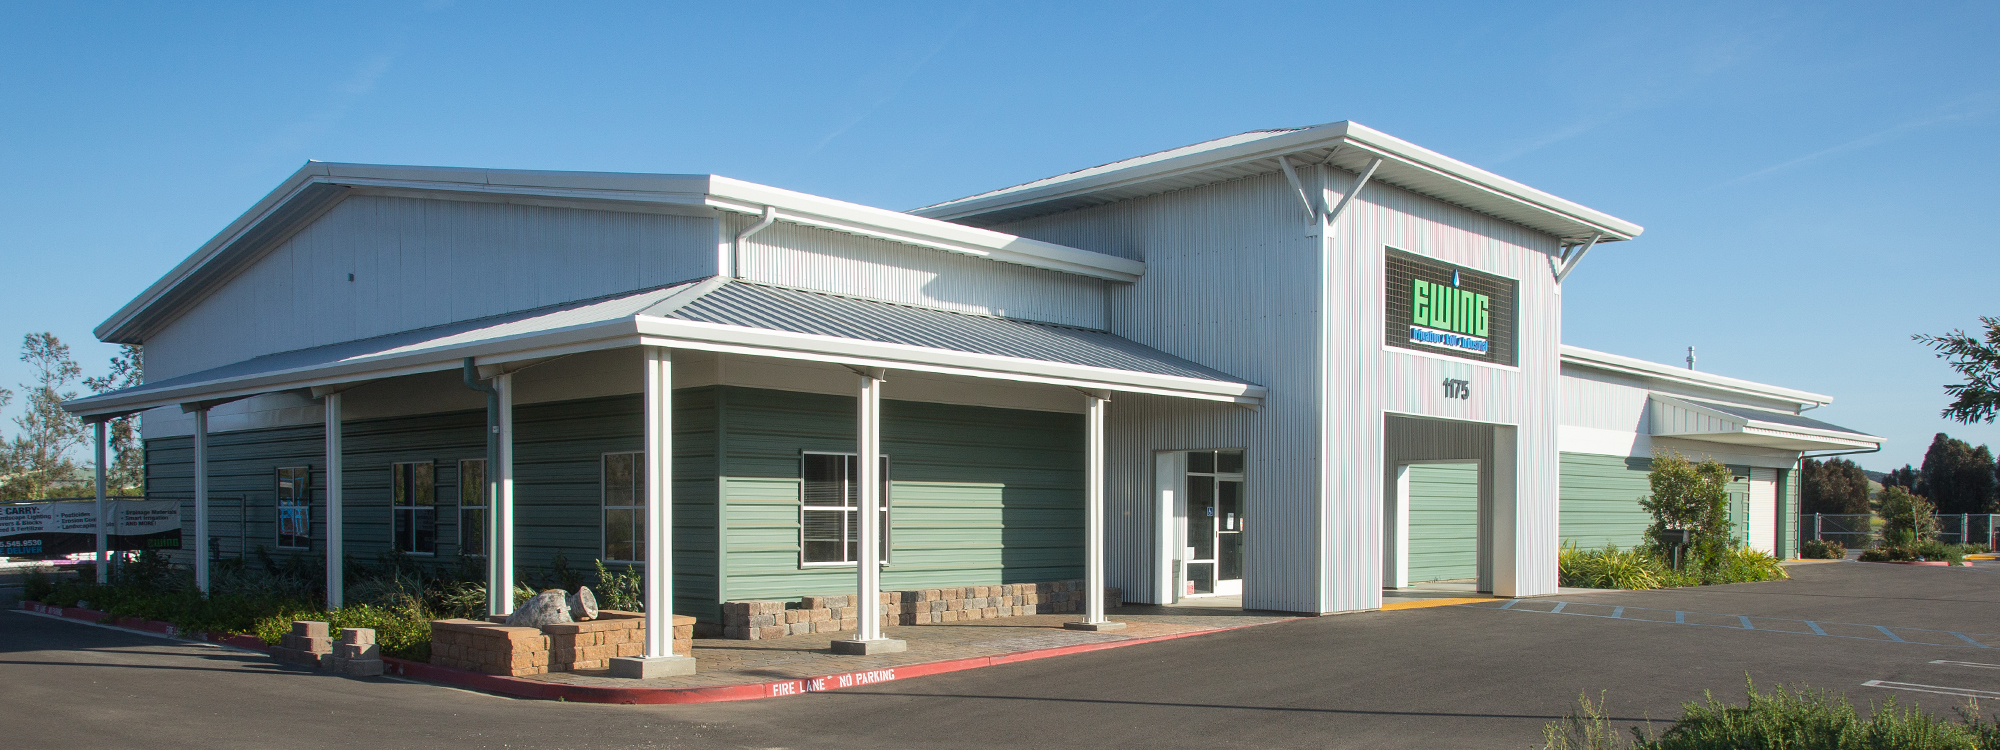 Light Manufacturing Industrial Building and Office Construction - San Luis Obispo Airport Commercial Building Construction Firm - JW Design & Construction